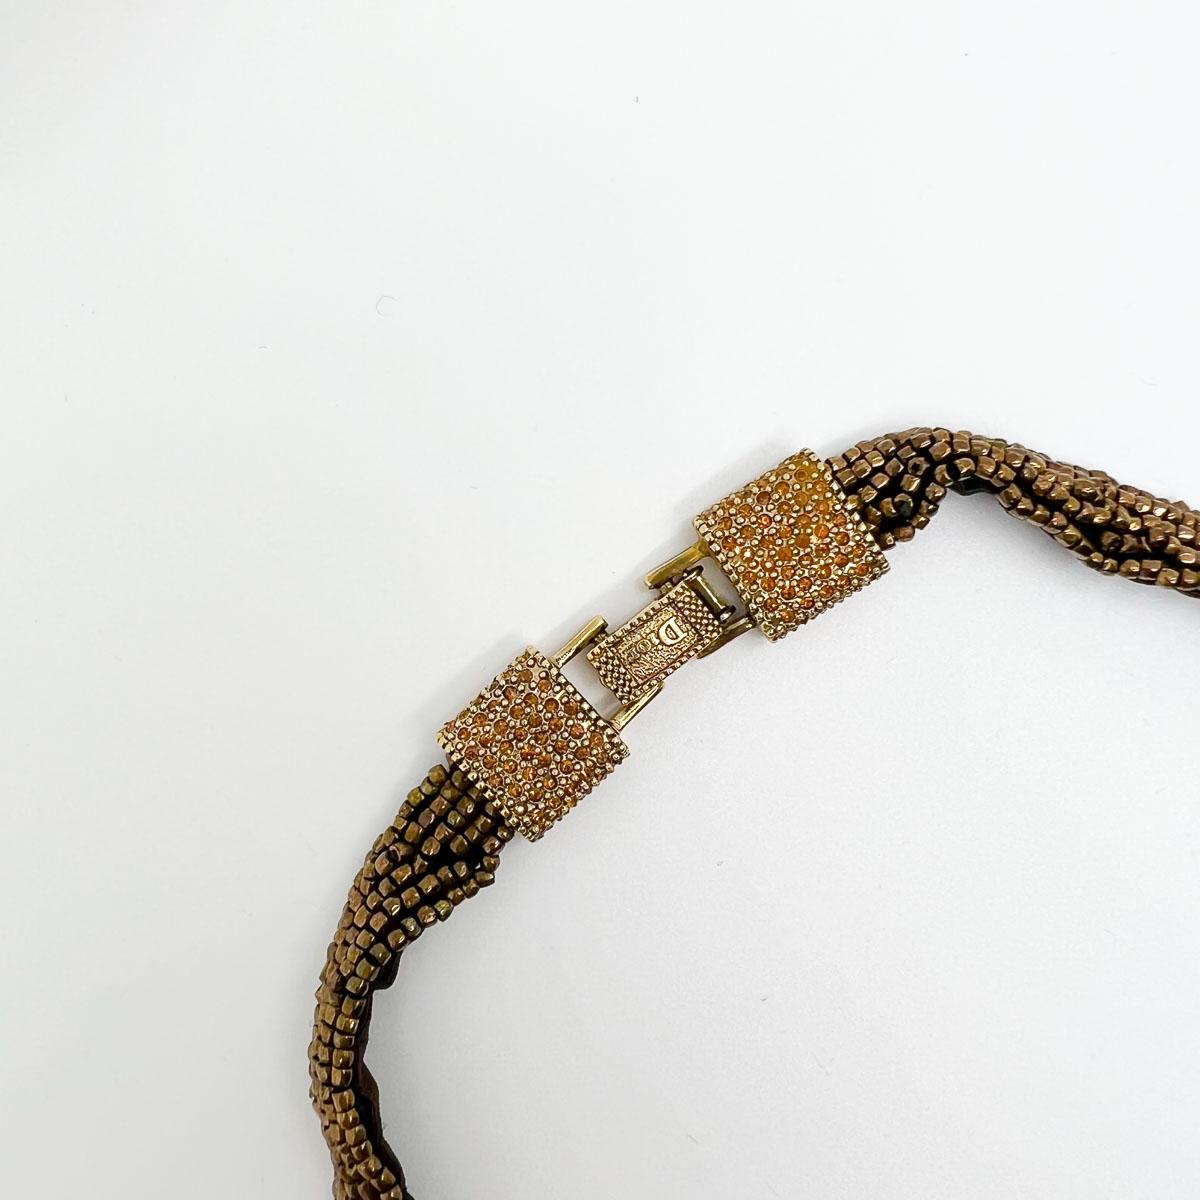 Christian Dior by Galliano Masai Inspired Bronzed Bib Necklace 1990s In Good Condition For Sale In Wilmslow, GB